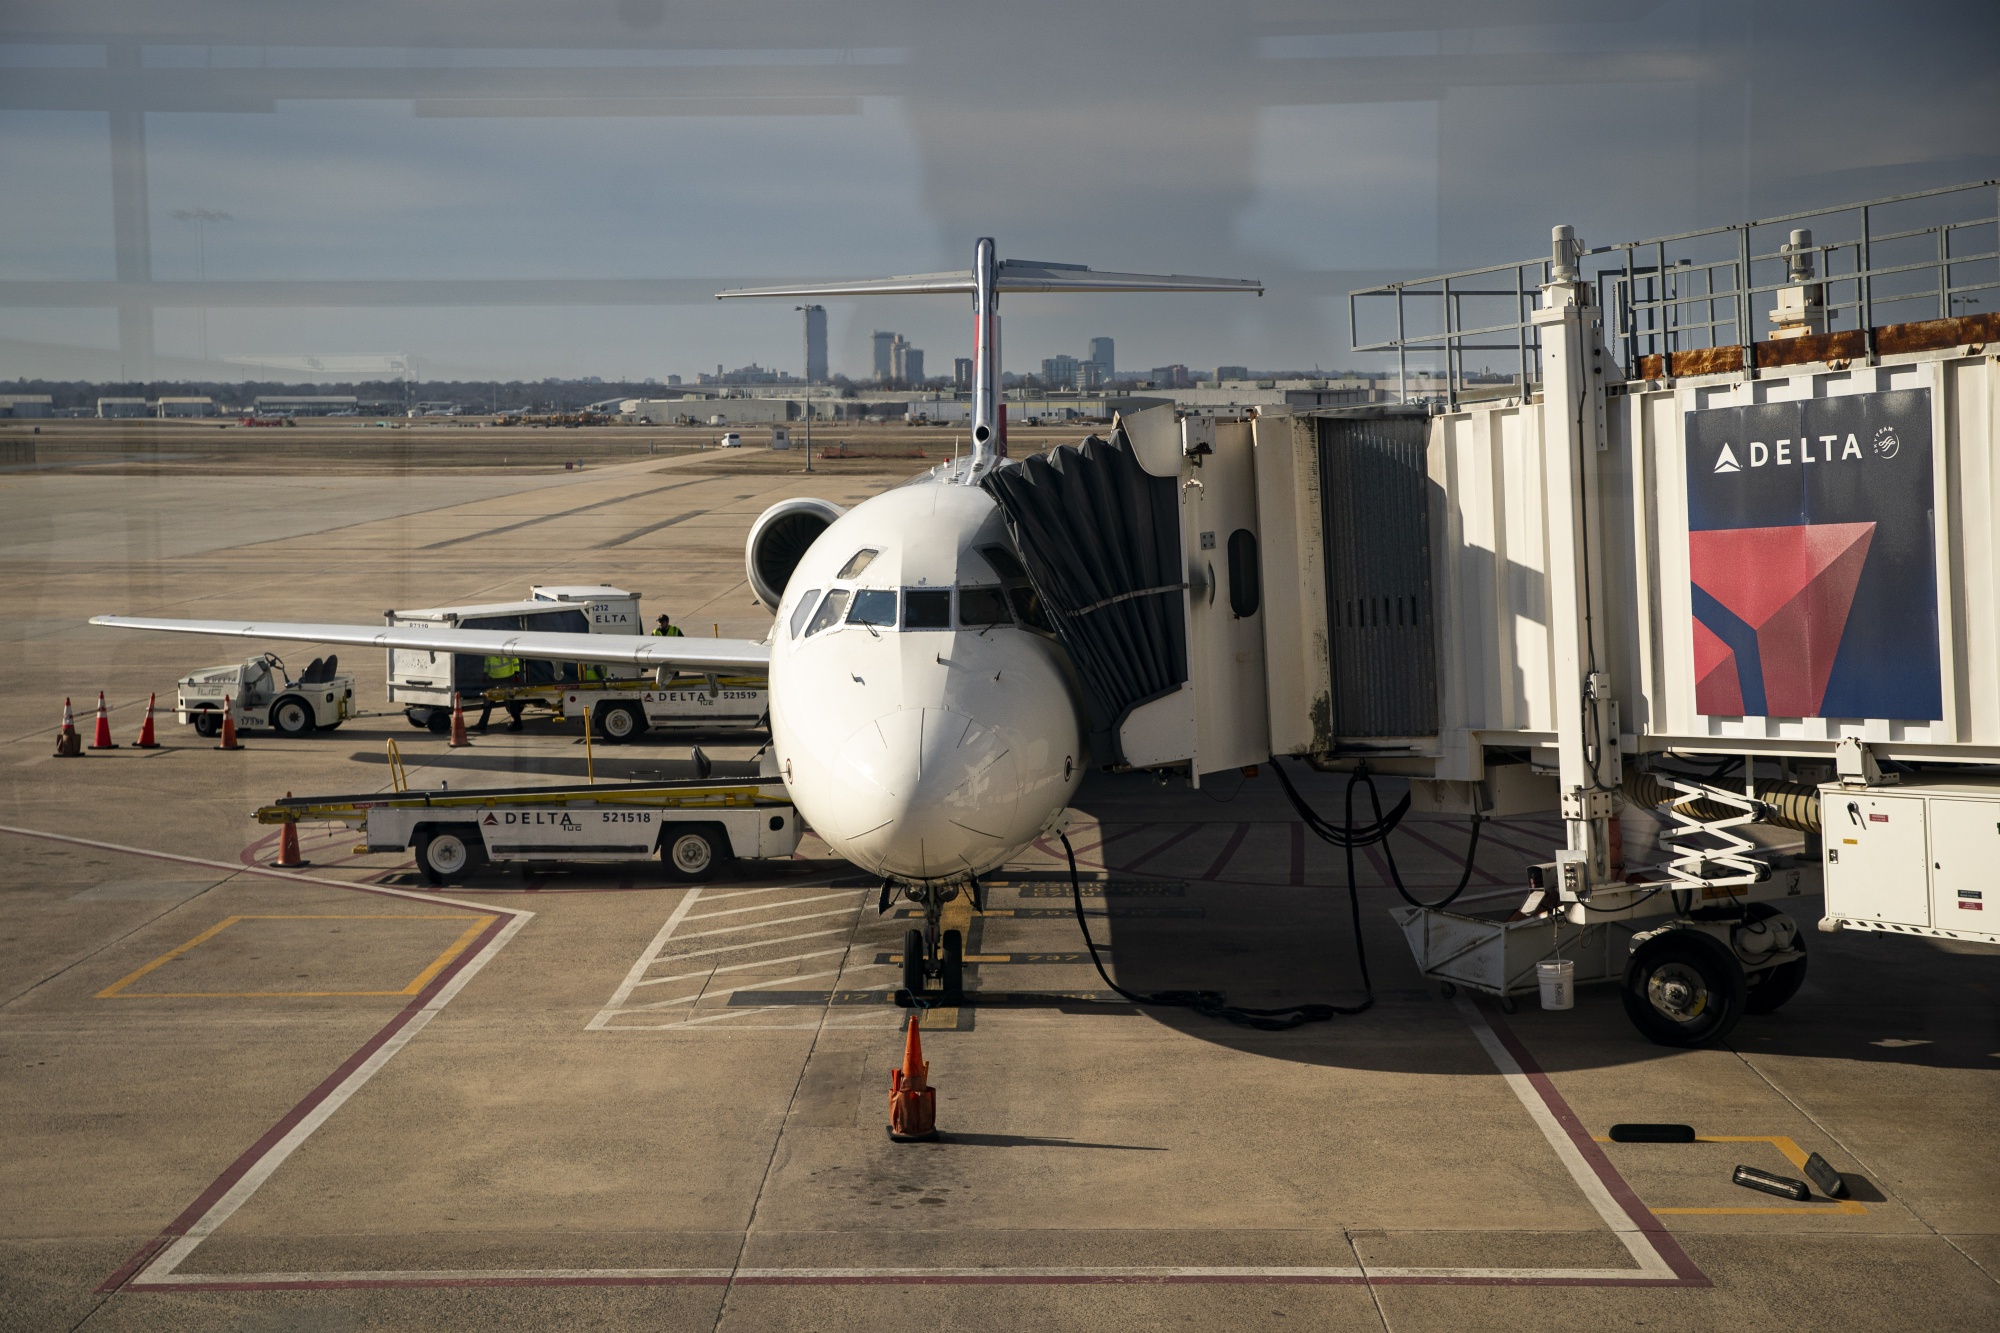 In 2020, Delta said it would become “the world’s first carbon-neutral airline on a global basis.”&nbsp;